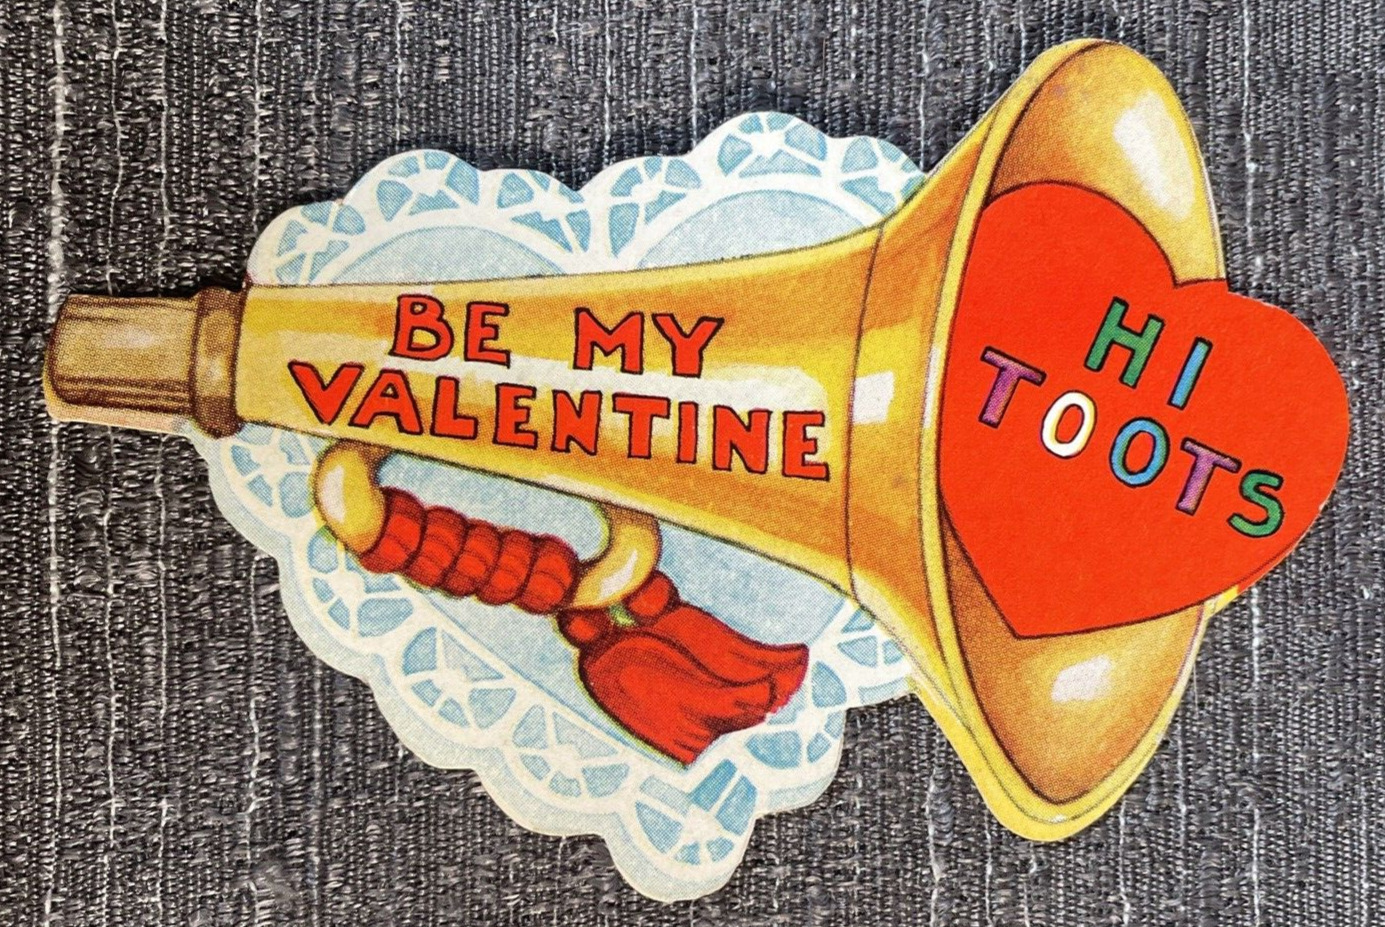 Vintage Valentine Card Americard Hi Toots Be My Horn Band Player